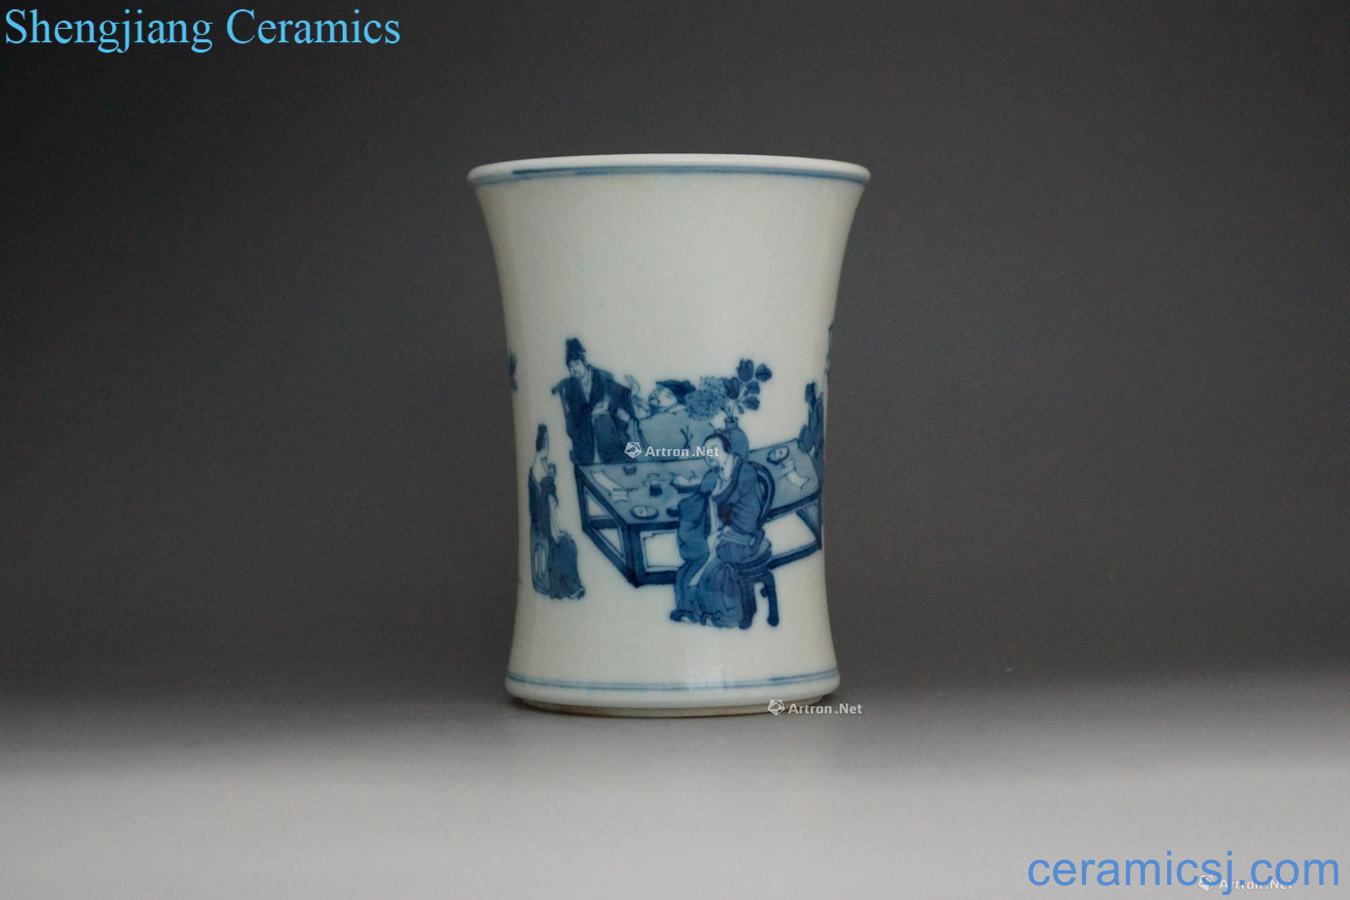 The qing emperor kangxi Blue and white characters pen container